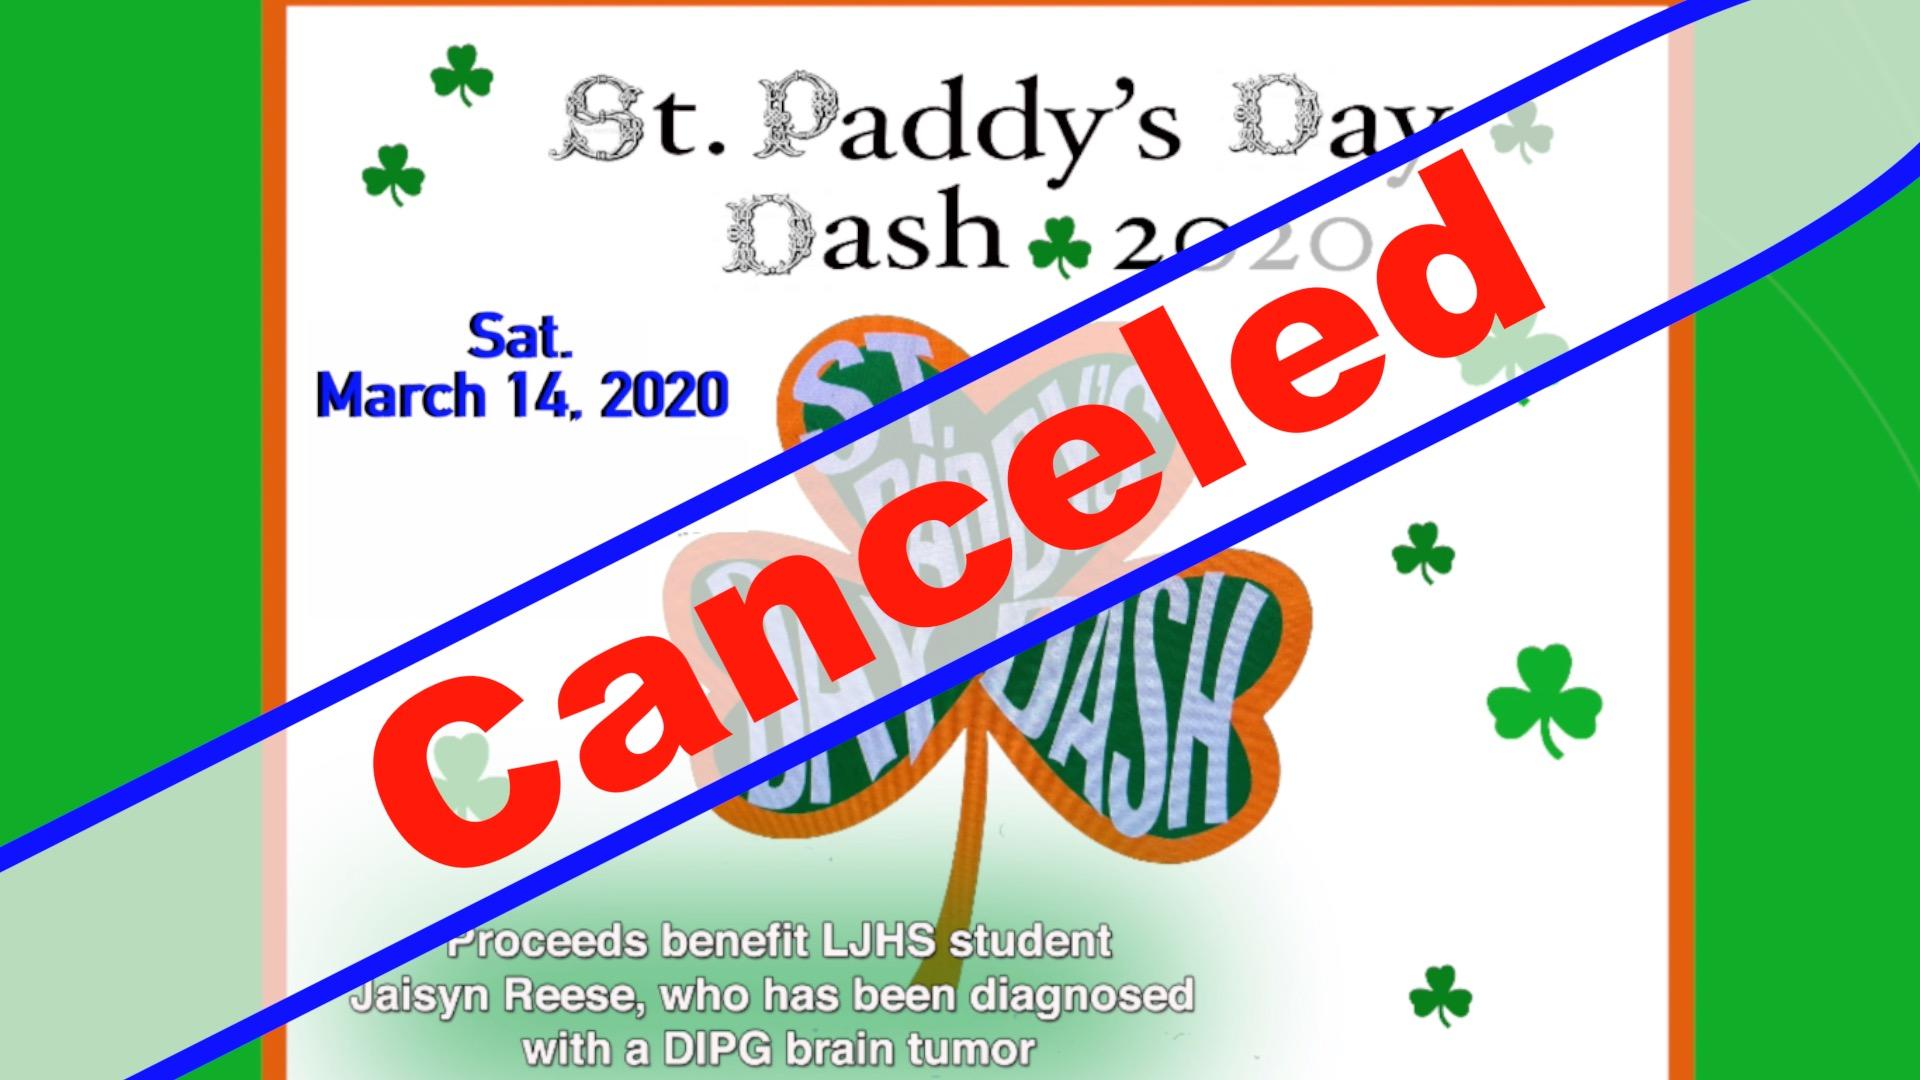 St. Paddy's Day Dash 2020- Saturday, March 14th canceled-Proceeds benefit LJHS student Jaisyn Reese who was diagnosed with a DIPG brain tumor